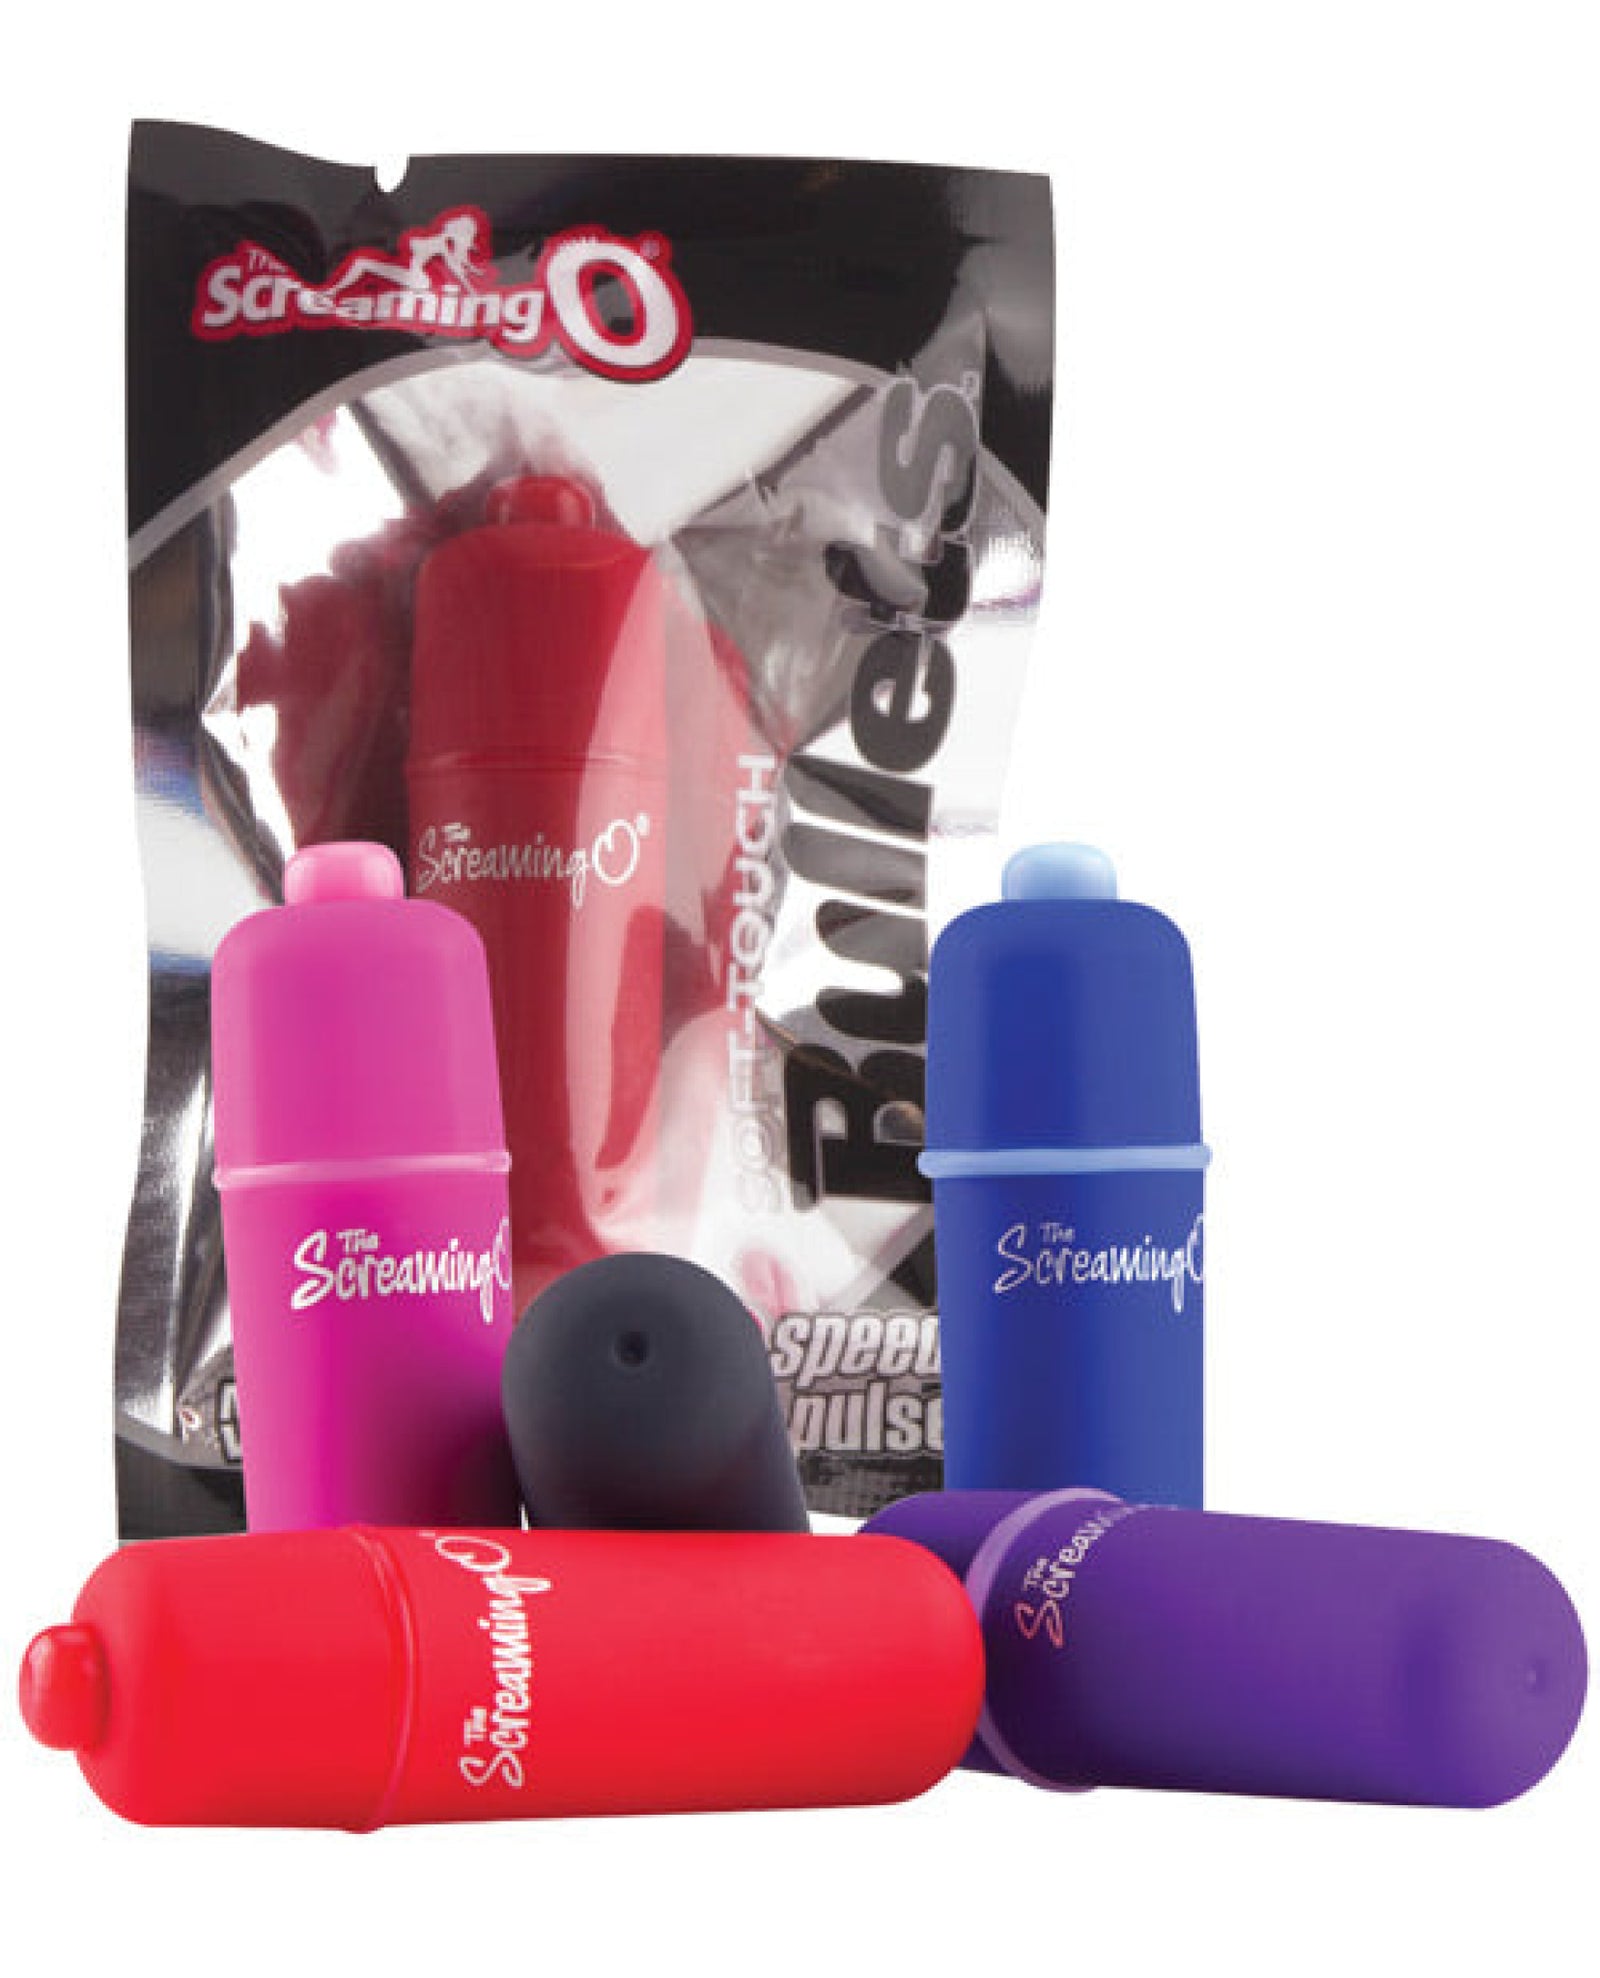 Screaming O 3 Speed Soft Touch Bullet - Asst. Colors Screaming O